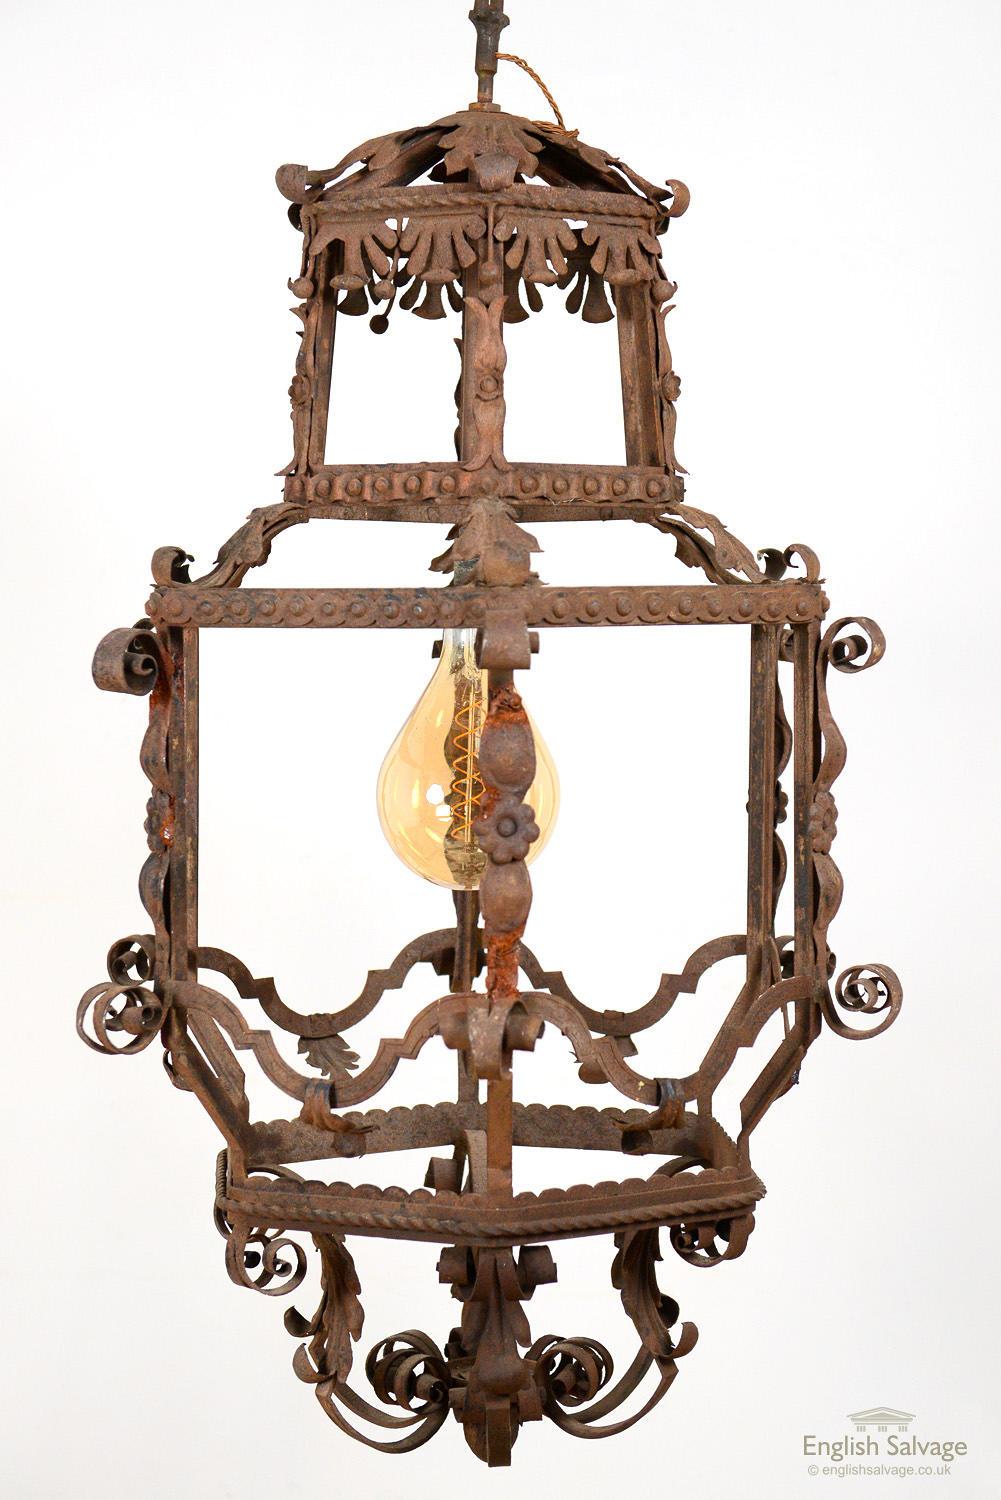 Stunning and very unusual hexagonal large Italian wrought iron lantern, dating from early 19th Century. Hexagonal in form with scrolling acanthus detail, rope and floral details. Surface rust and a lovely patina, evidence of its great age. Newly